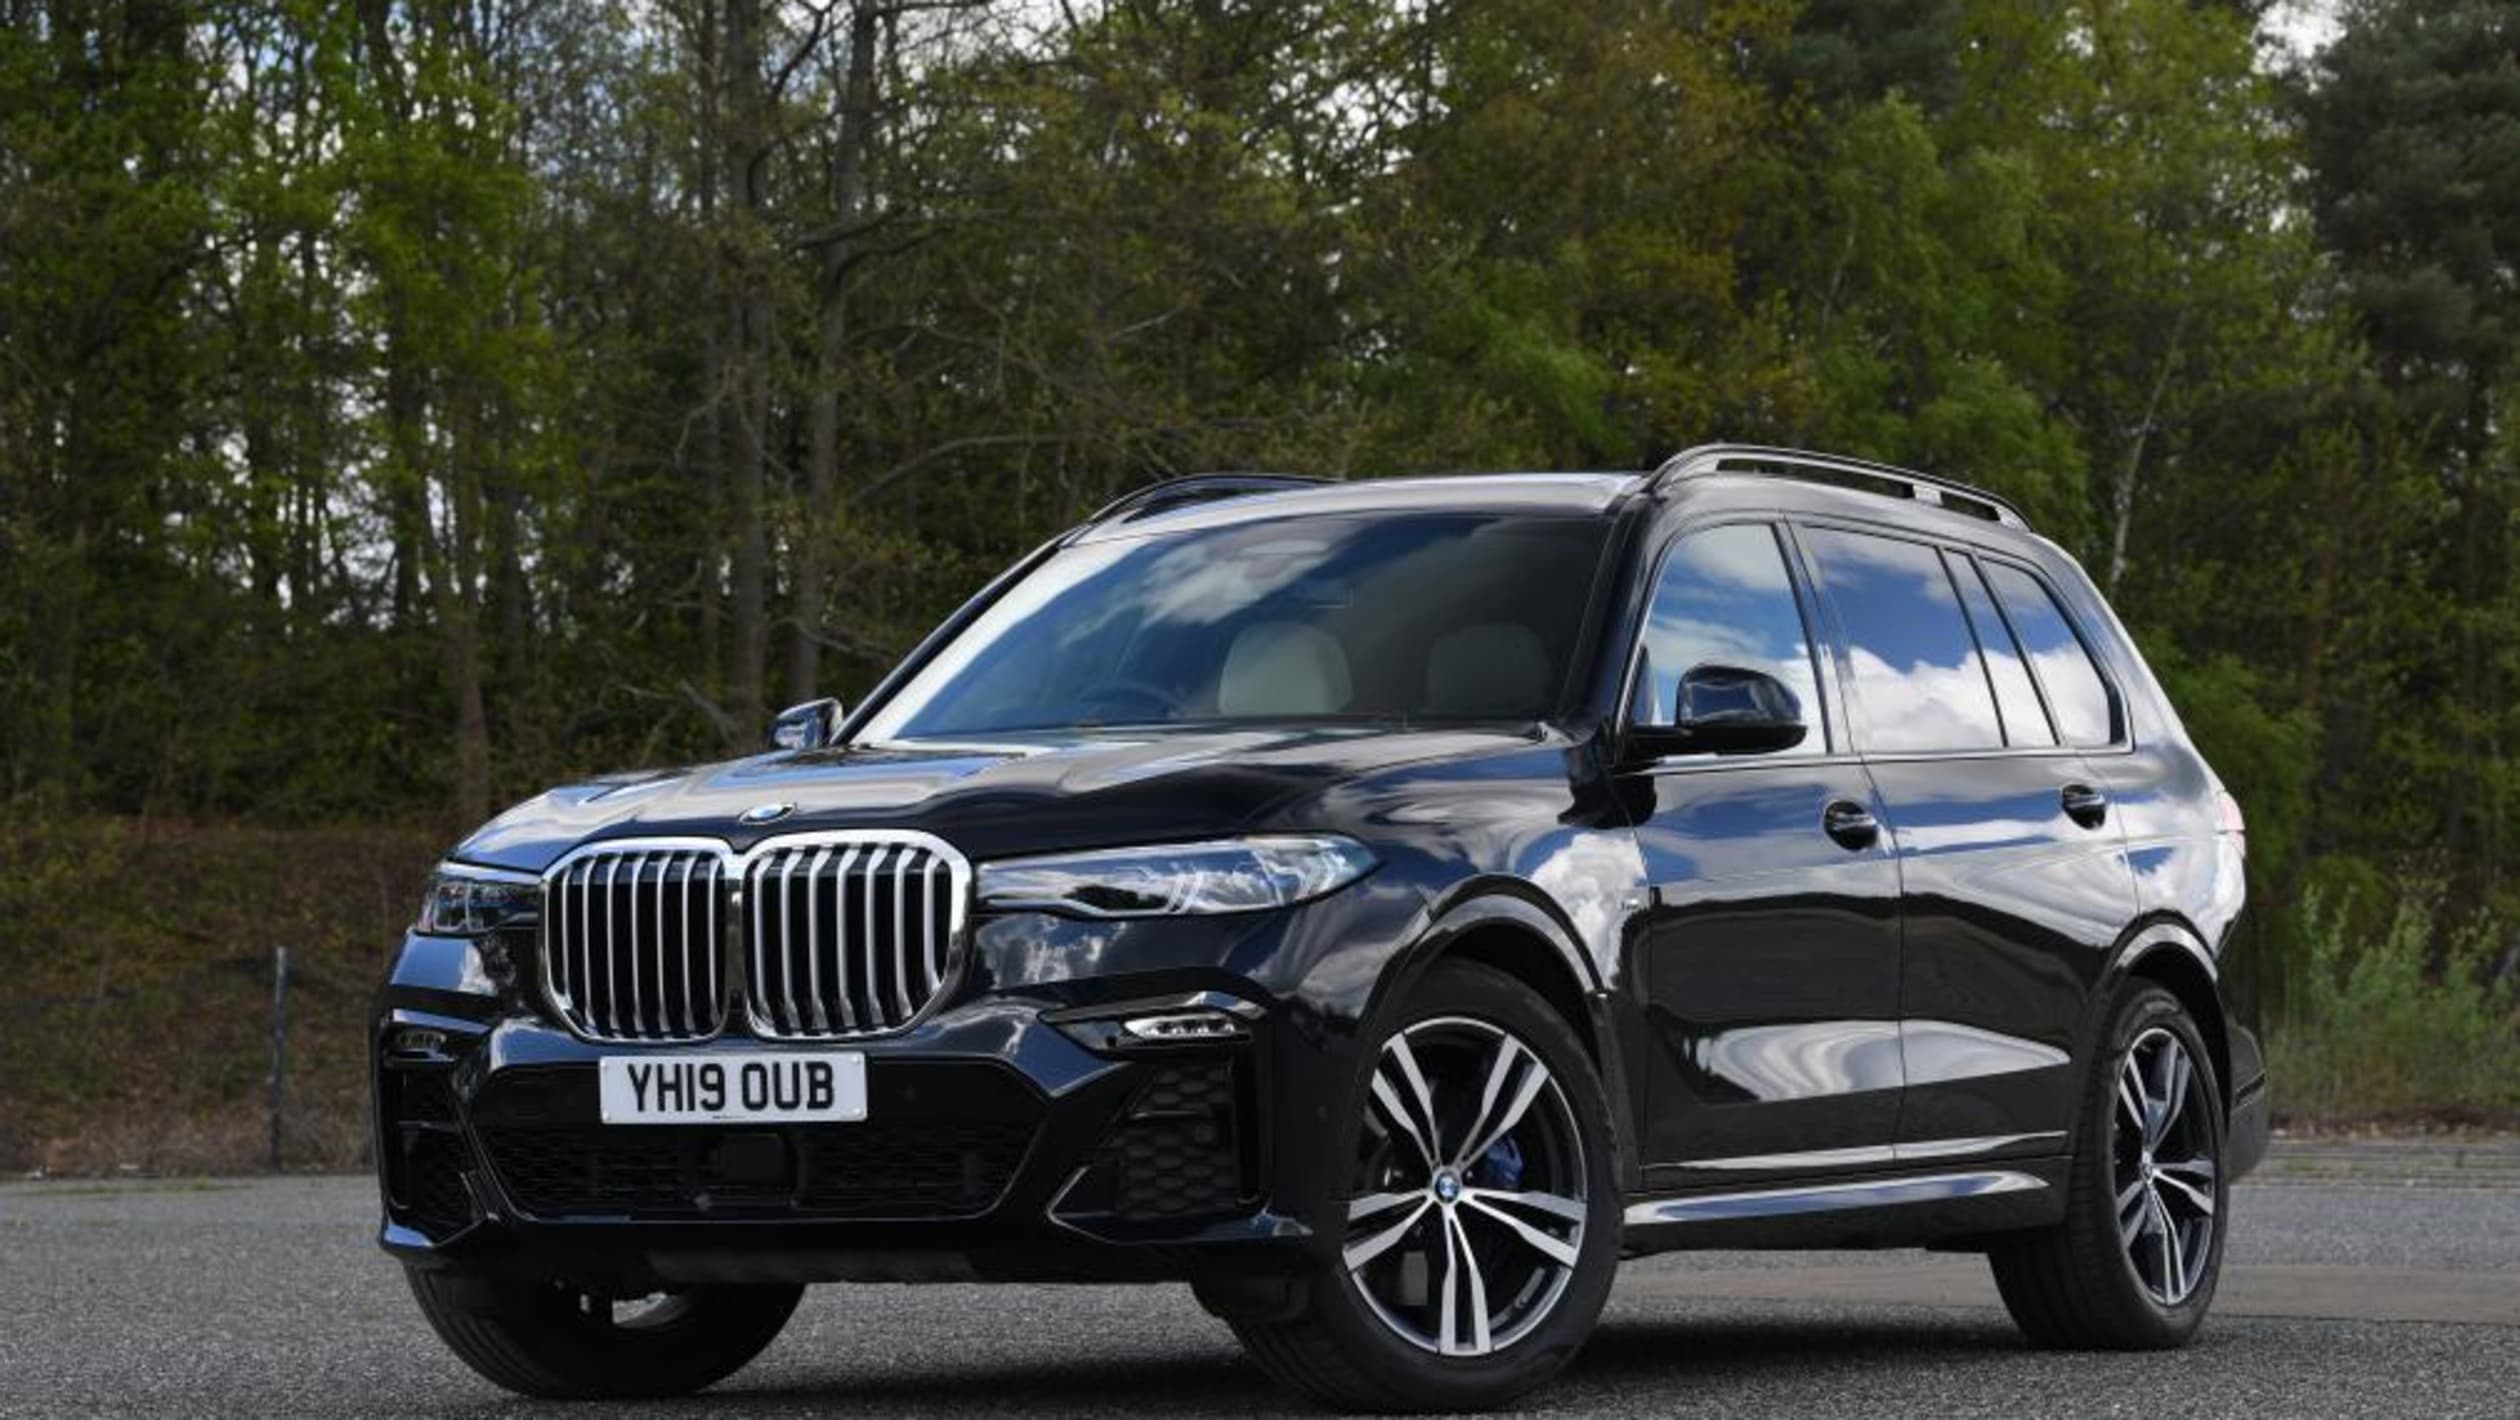 BMW X7 review - gallery | Auto Express